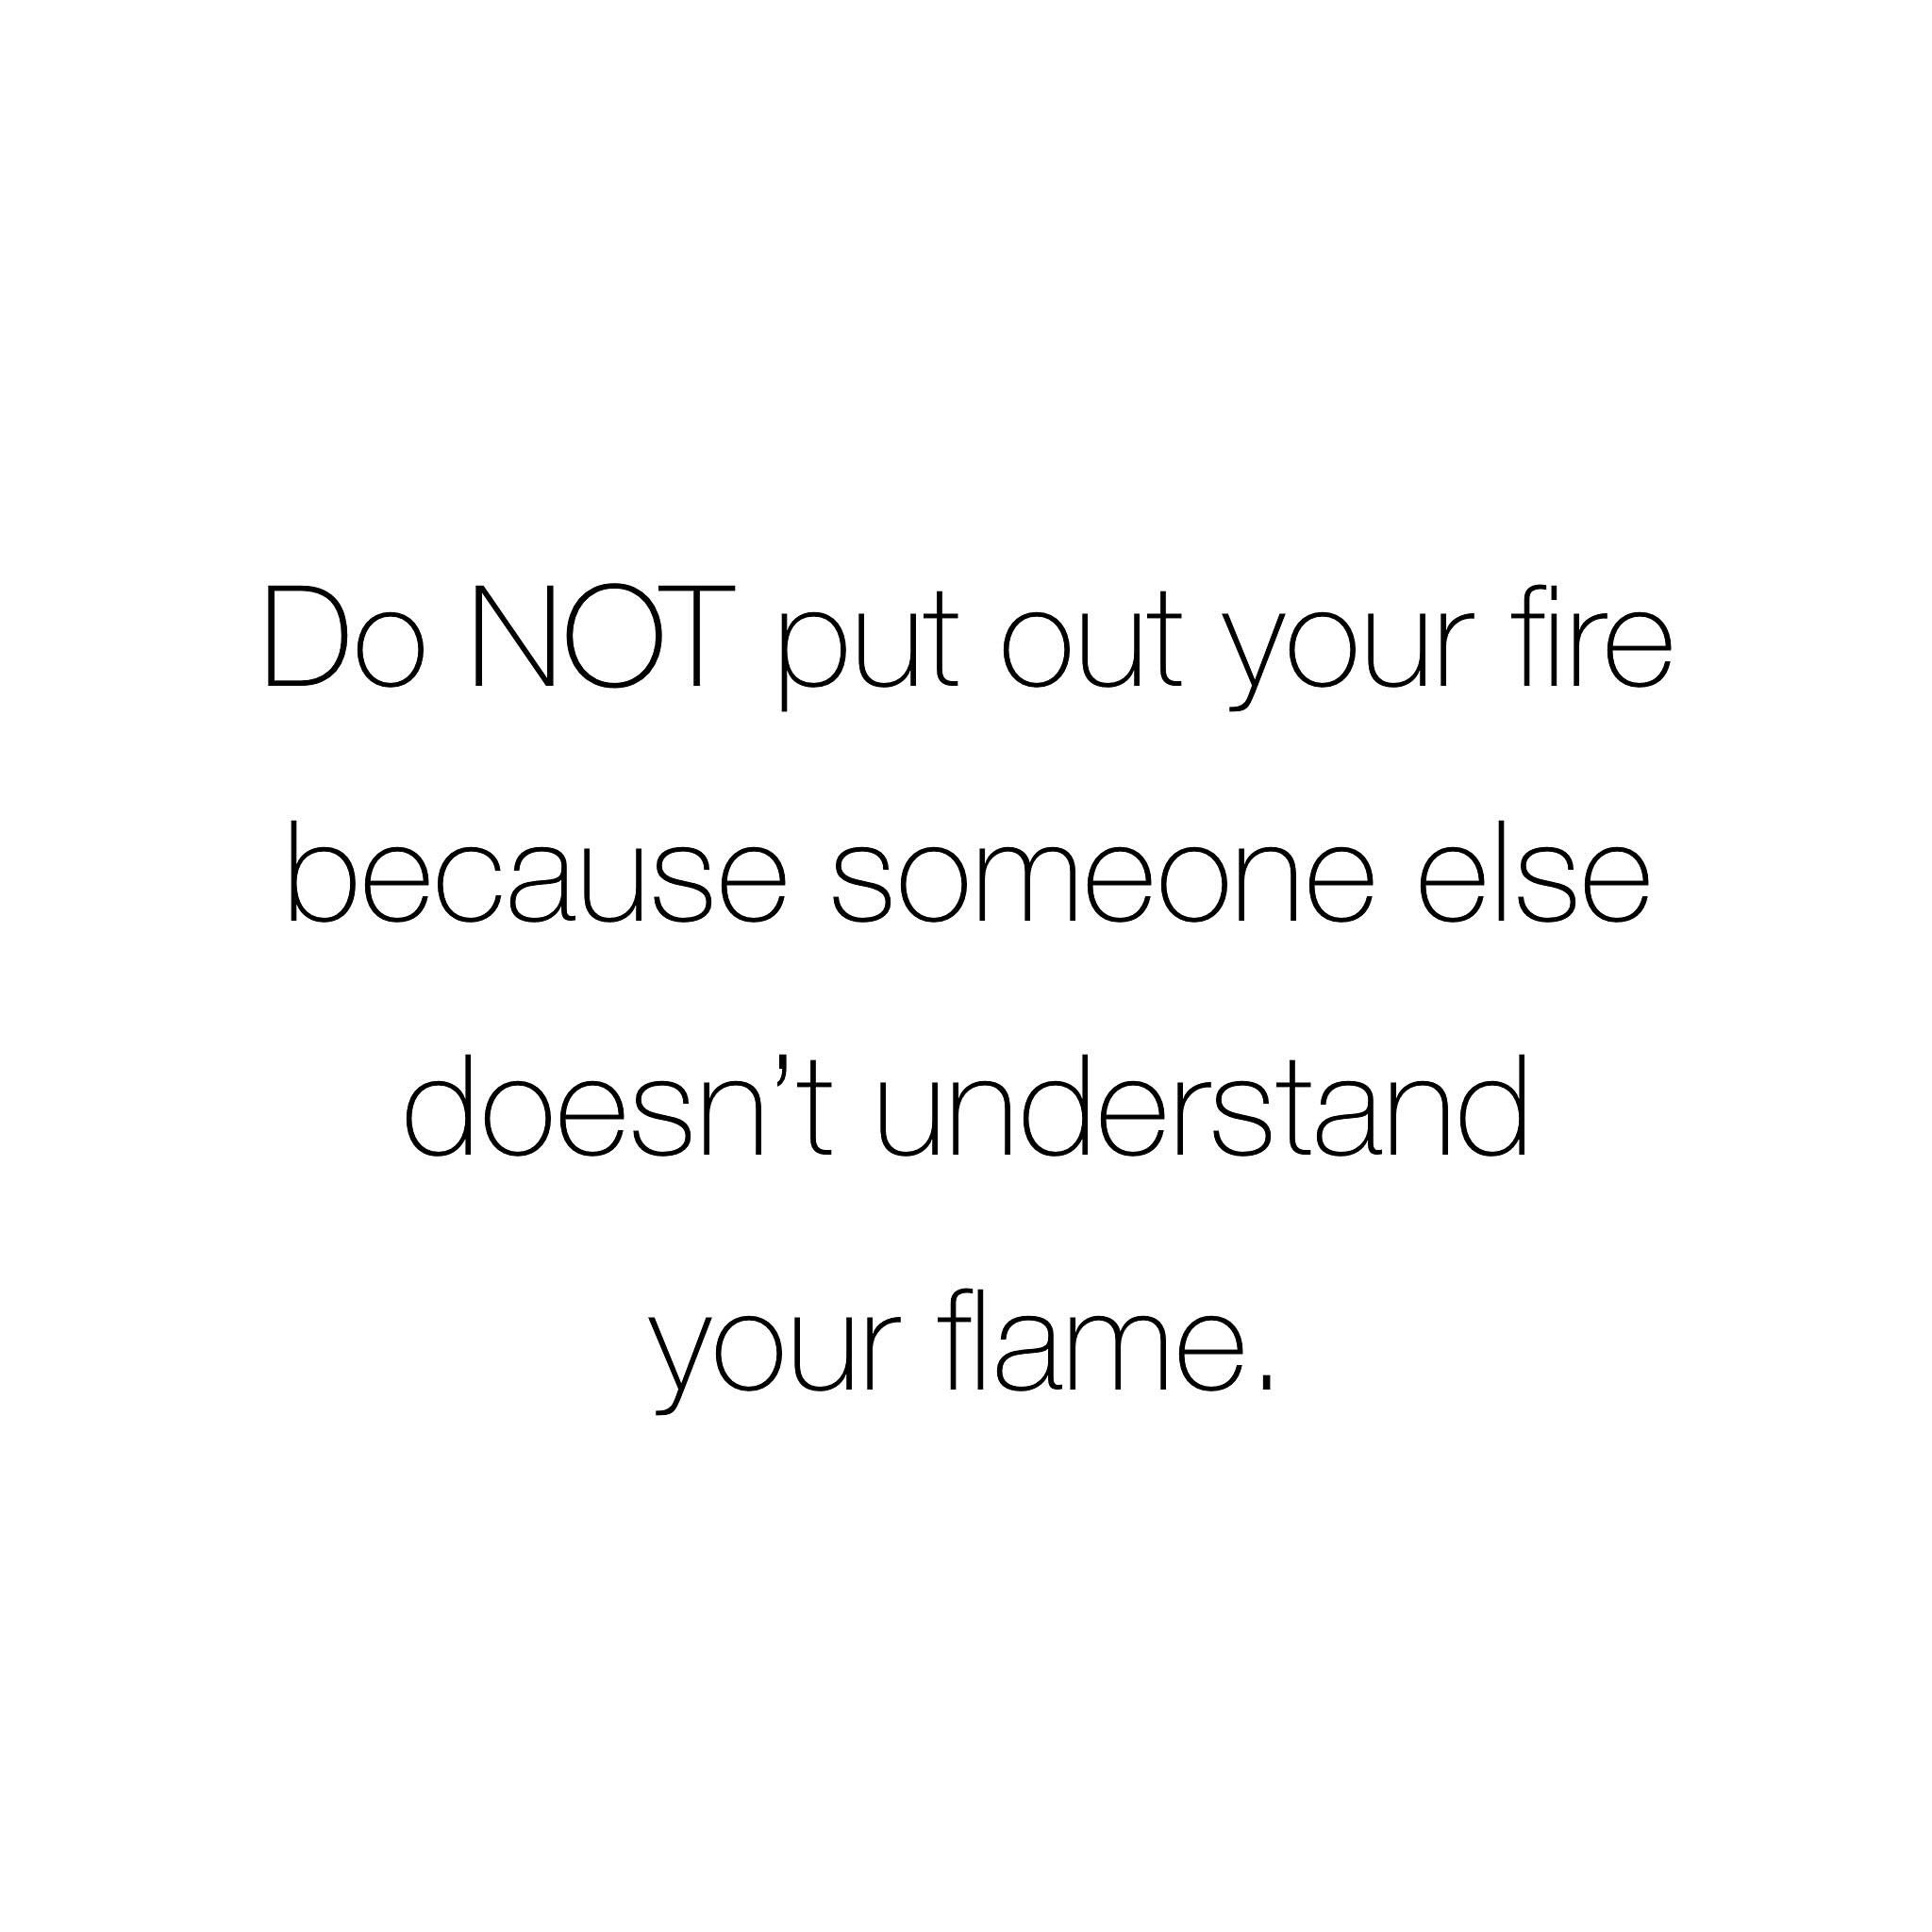 Keep your flame burning! There are a lot of nay sayers out there, don&rsquo;t listen to them&hellip;. Keep your light flaming! 🕯️🕯️🕯️ #womaninbusiness #womanentrepreneur #lifequotes